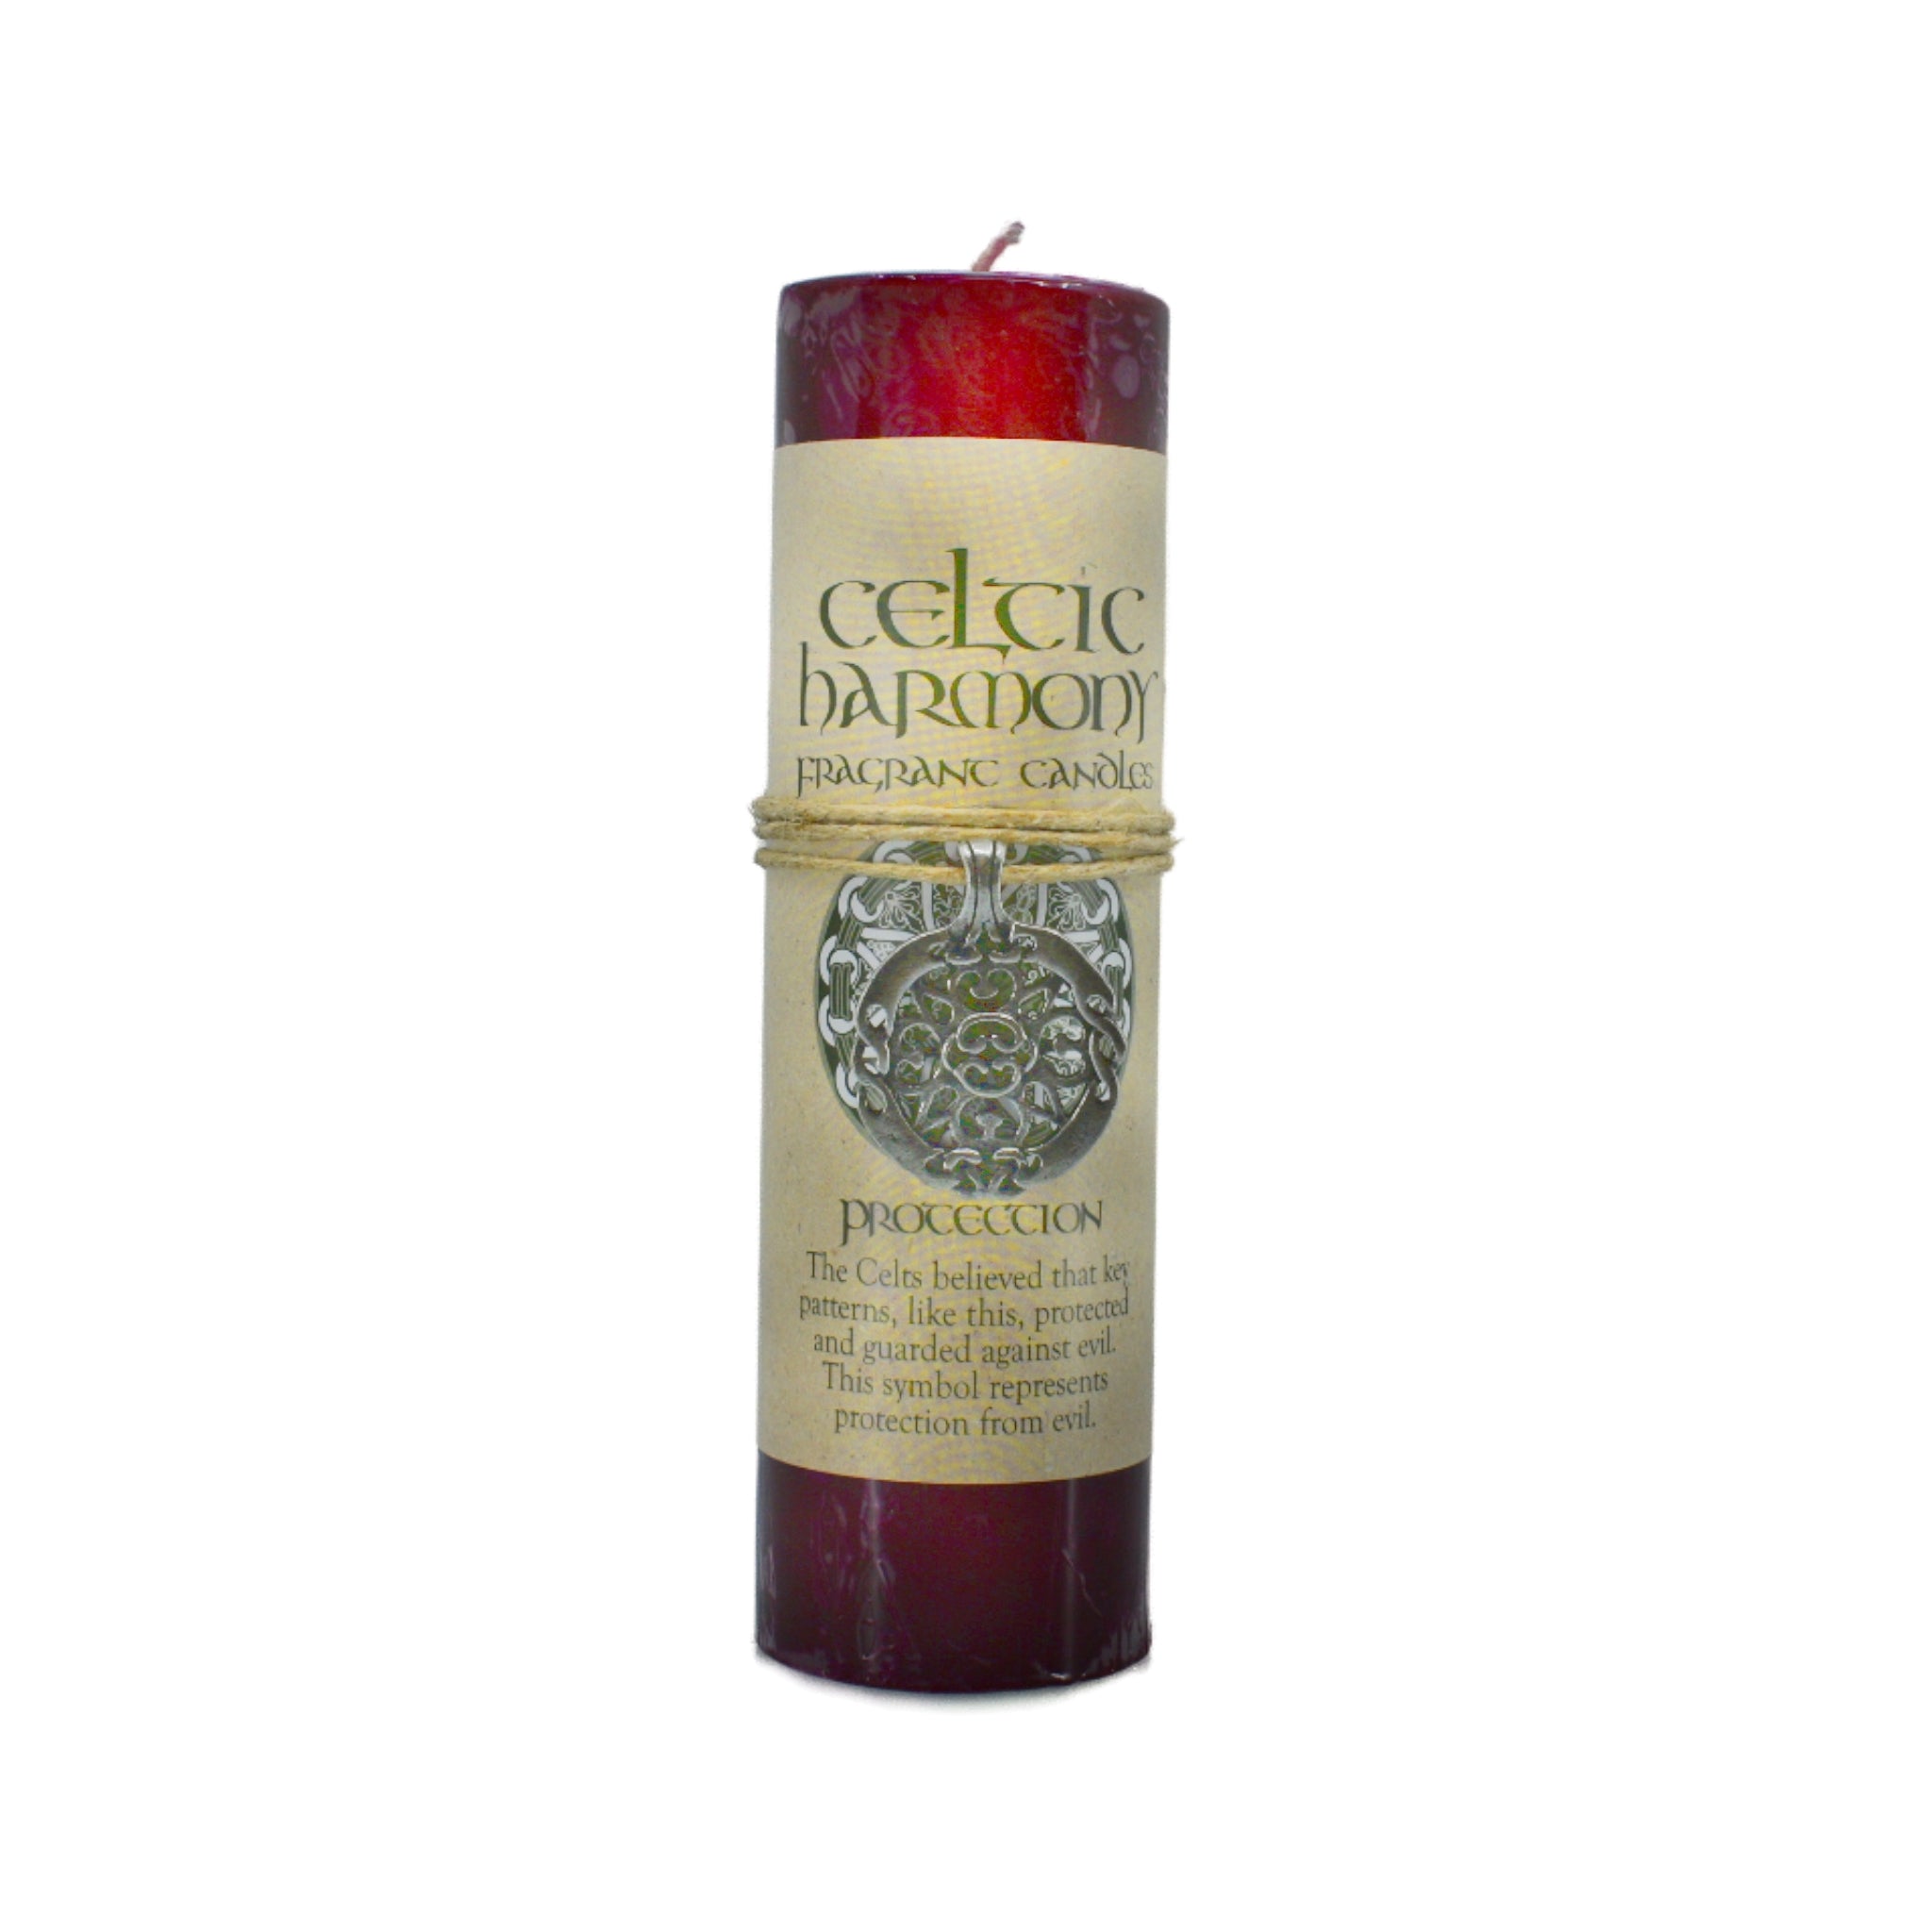 Protection Celtic Pendant Candle.  The pewter pendent can b worn as a necklace or used as an amulet.  Lighting this candle protects against evil in your surroundings.  Negative energies and the evil eye drains you and makes you vulnerable.  The scented candle brings you inner peace and purifies your surroundings.